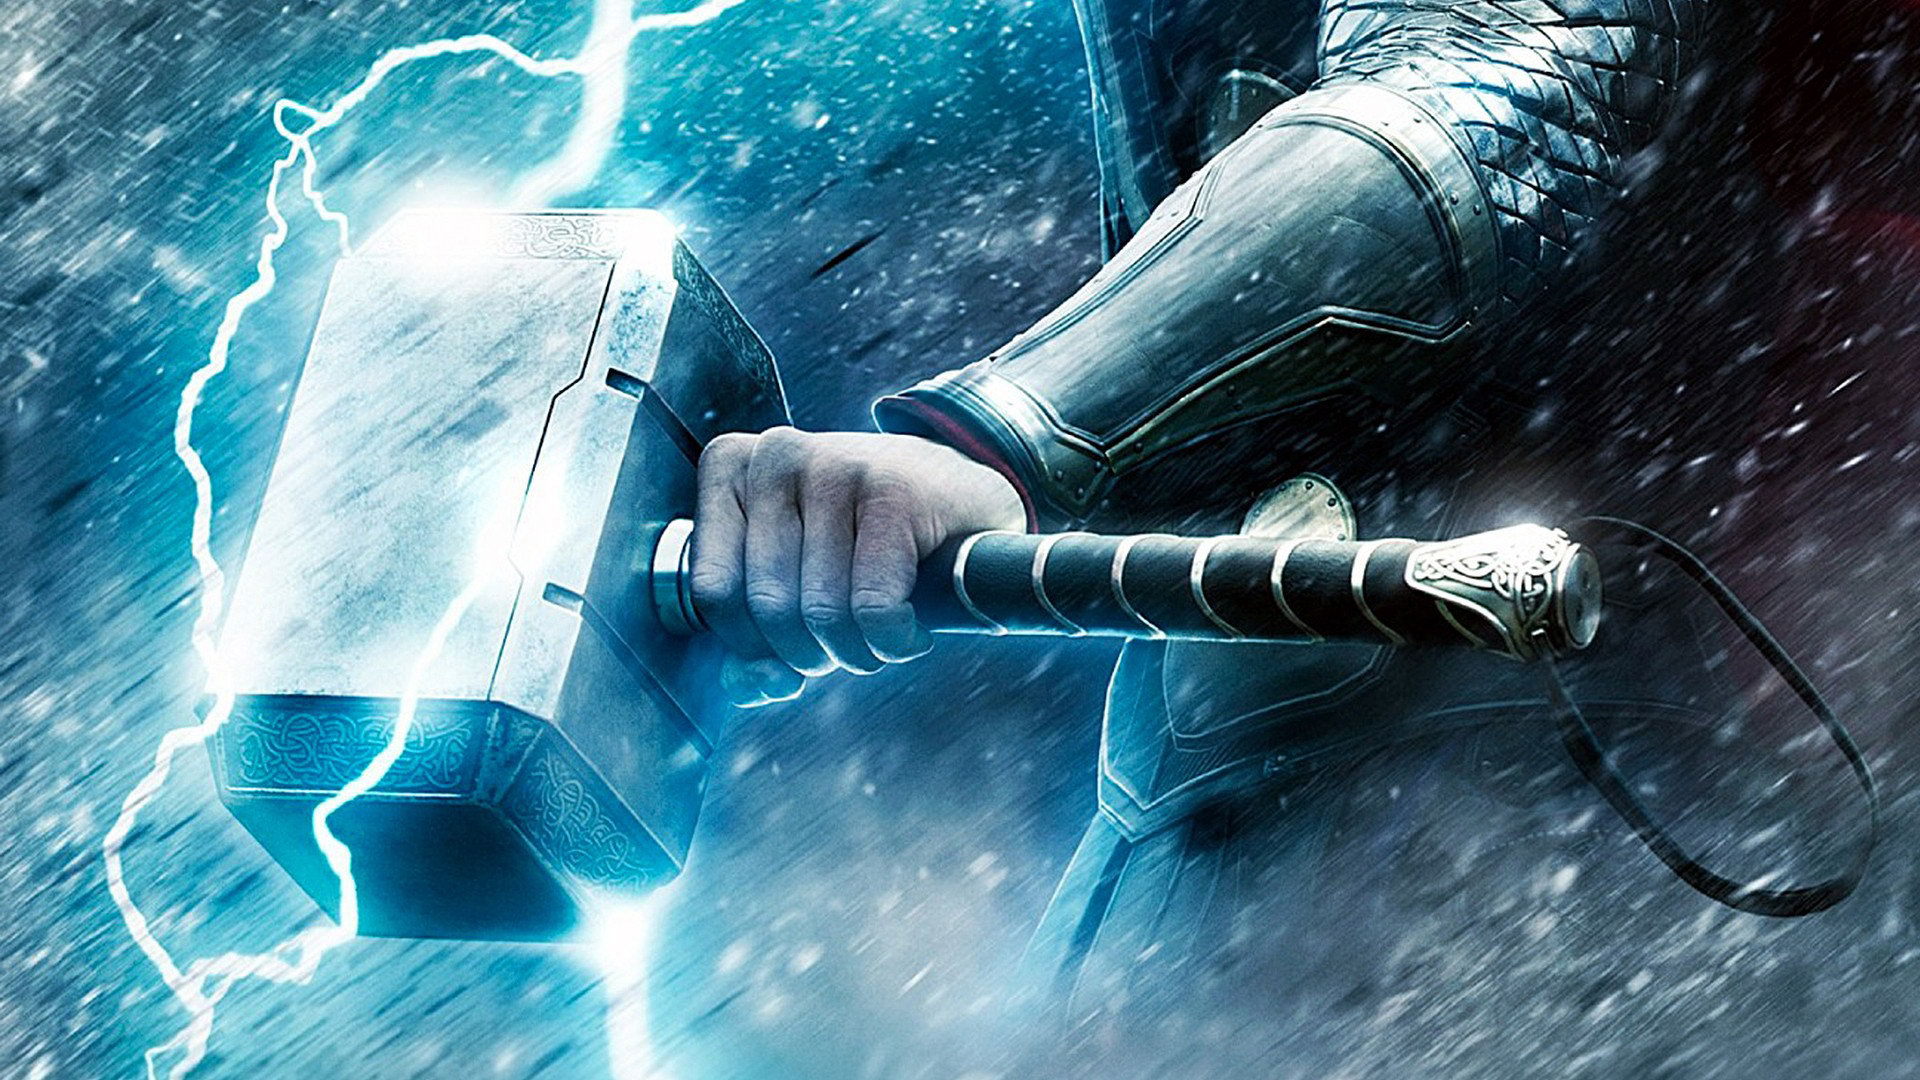 Wallpaper Trisula Thor 3d For Android Image Num 68